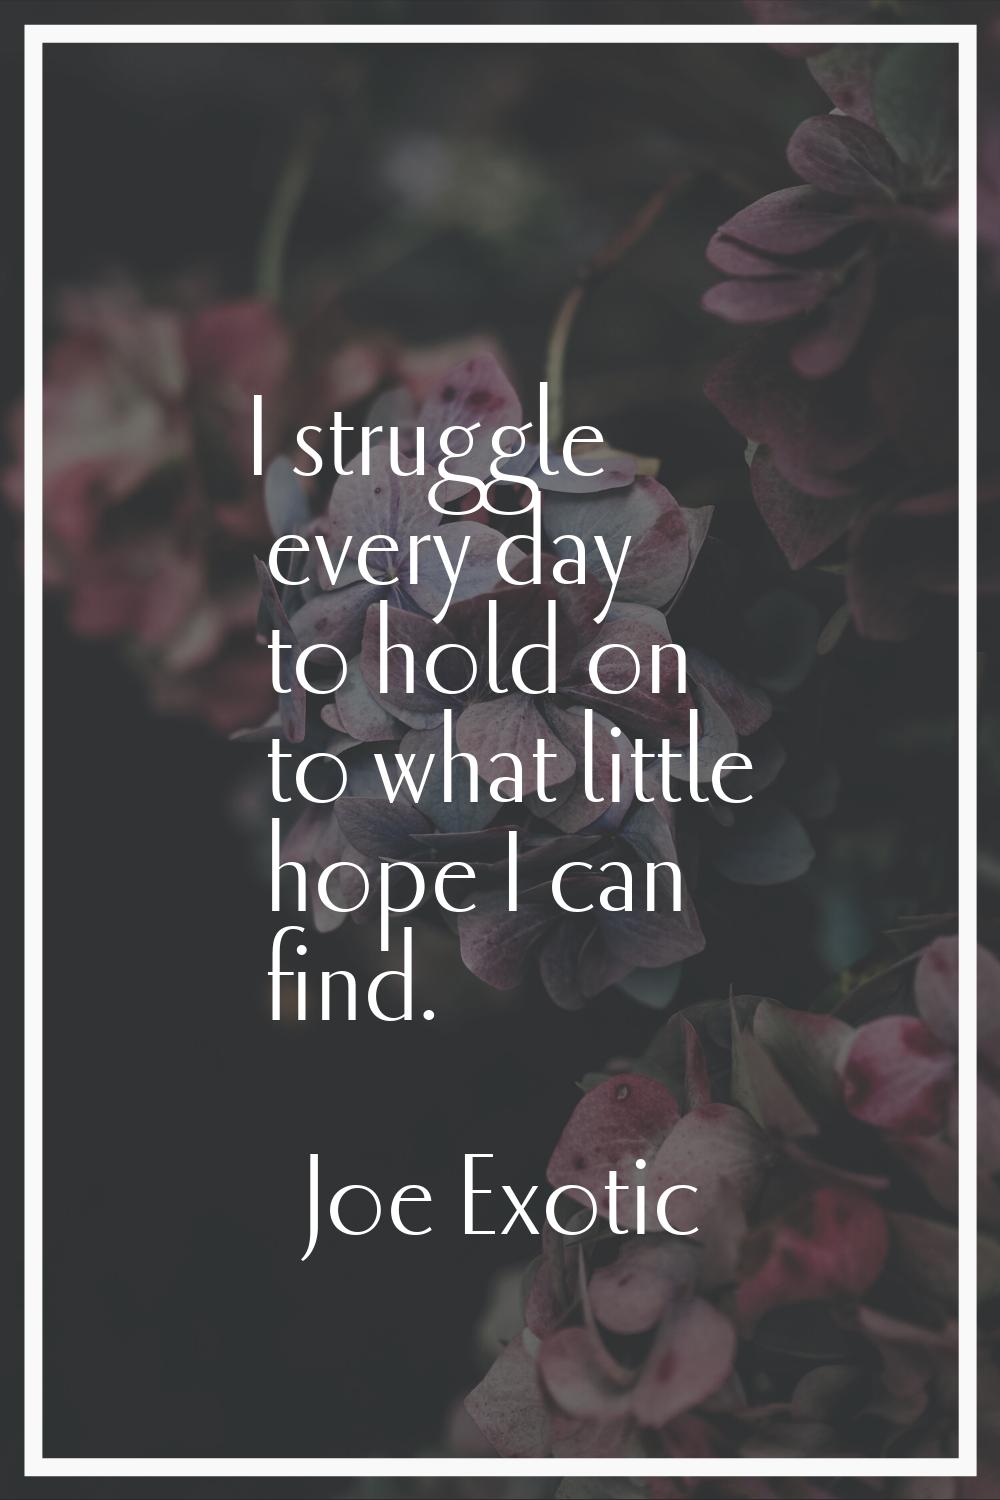 I struggle every day to hold on to what little hope I can find.